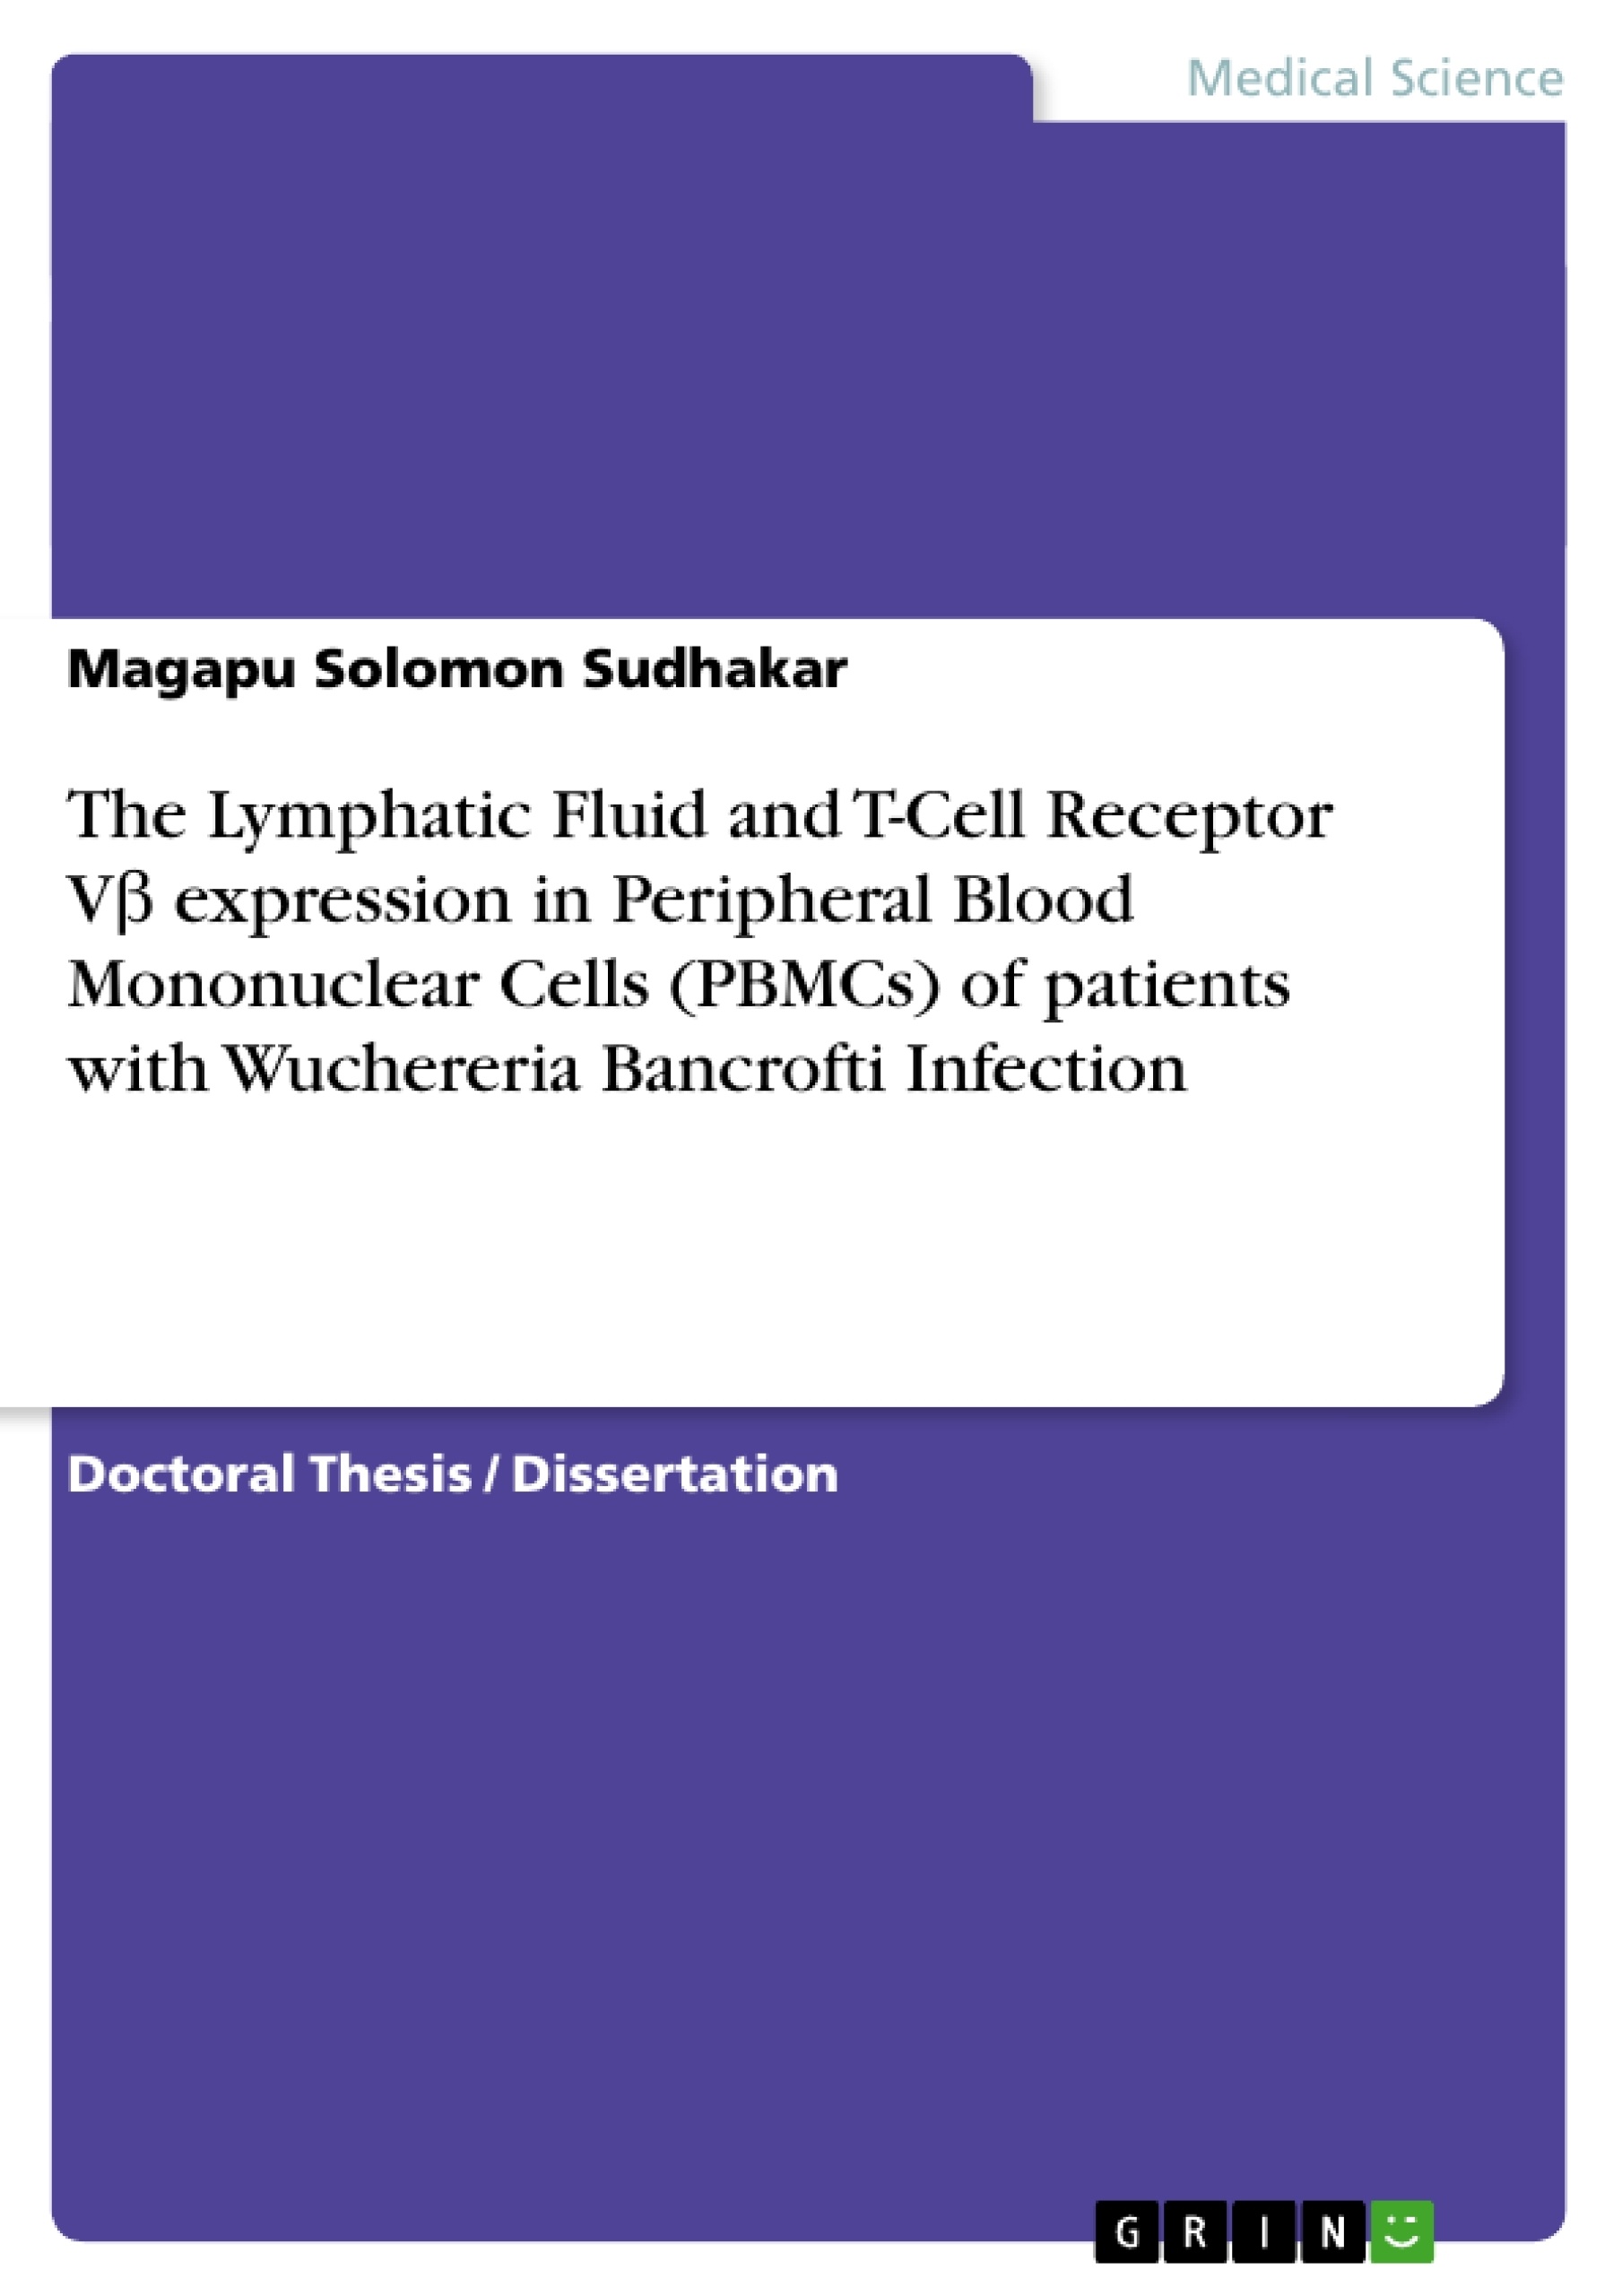 Title: The Lymphatic Fluid and T-Cell Receptor Vβ expression in Peripheral Blood Mononuclear Cells (PBMCs) of patients with Wuchereria Bancrofti Infection